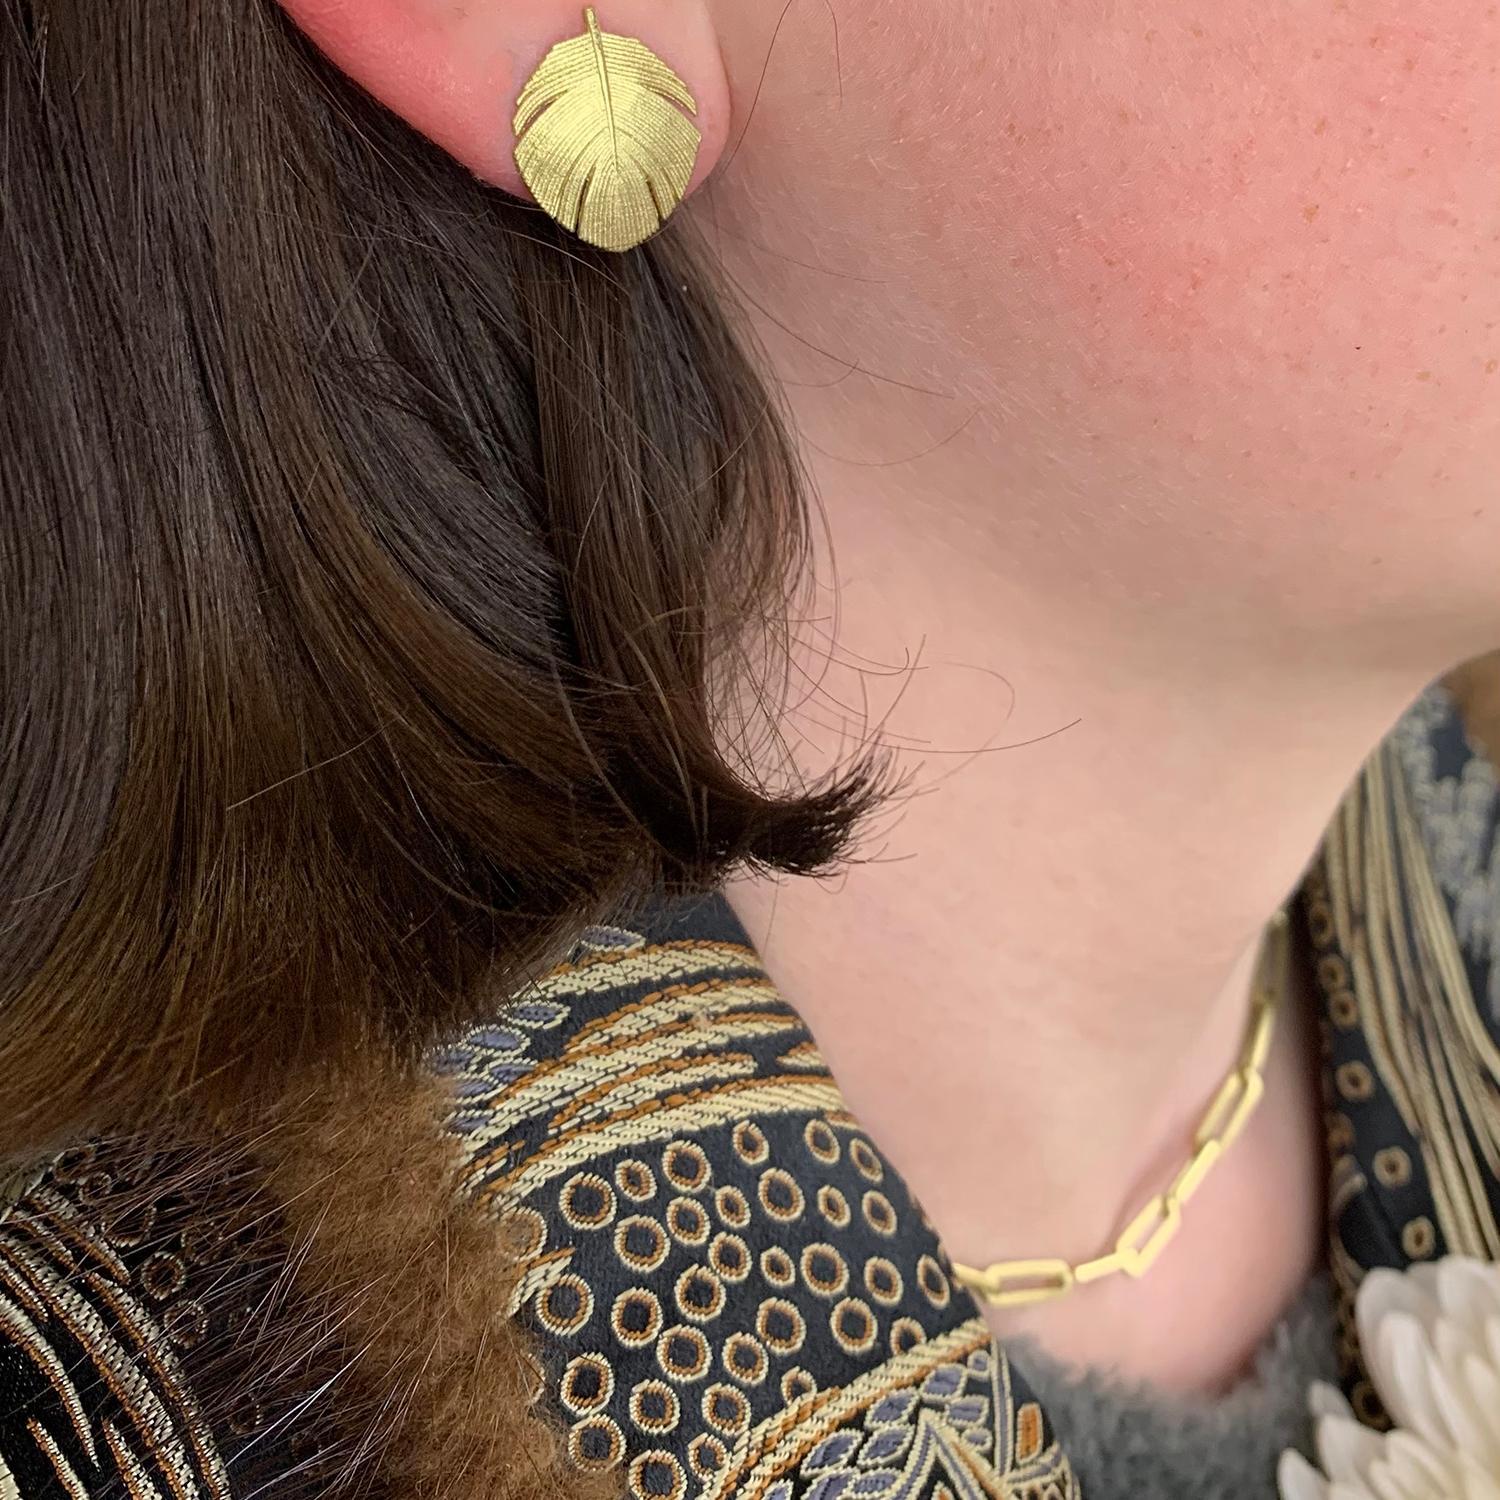 Fabulous 18k yellow gold feather earrings with tube set diamond accents will glitter and glow on your ears! A smaller version of our wide gold feather earrings might be just what you're looking for. The earrings are post backed and measure 3/4